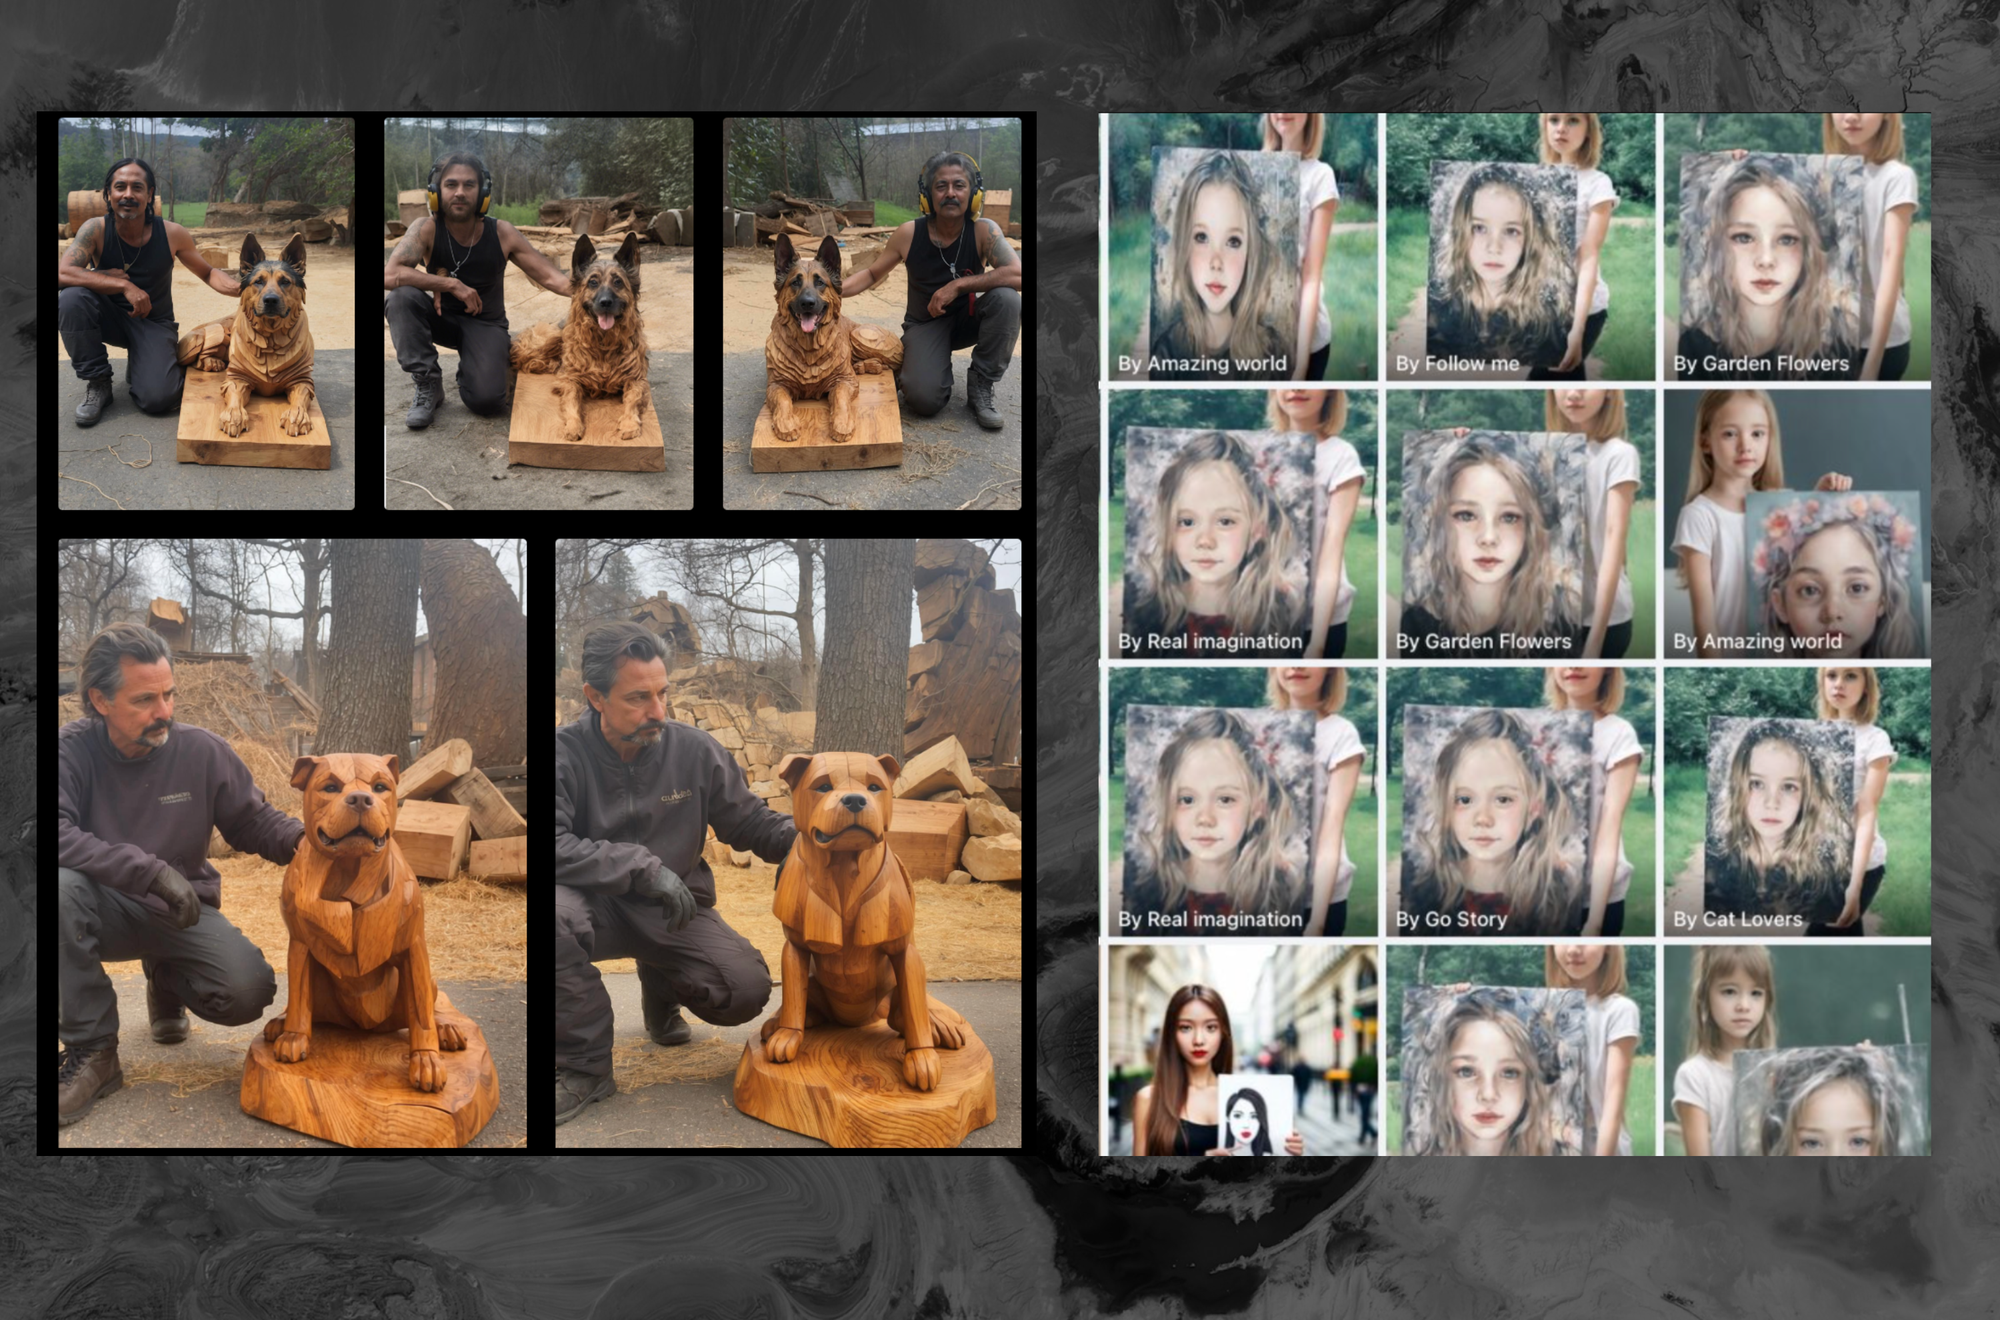 Facebook Is Being Overrun With Stolen, AI-Generated Images That